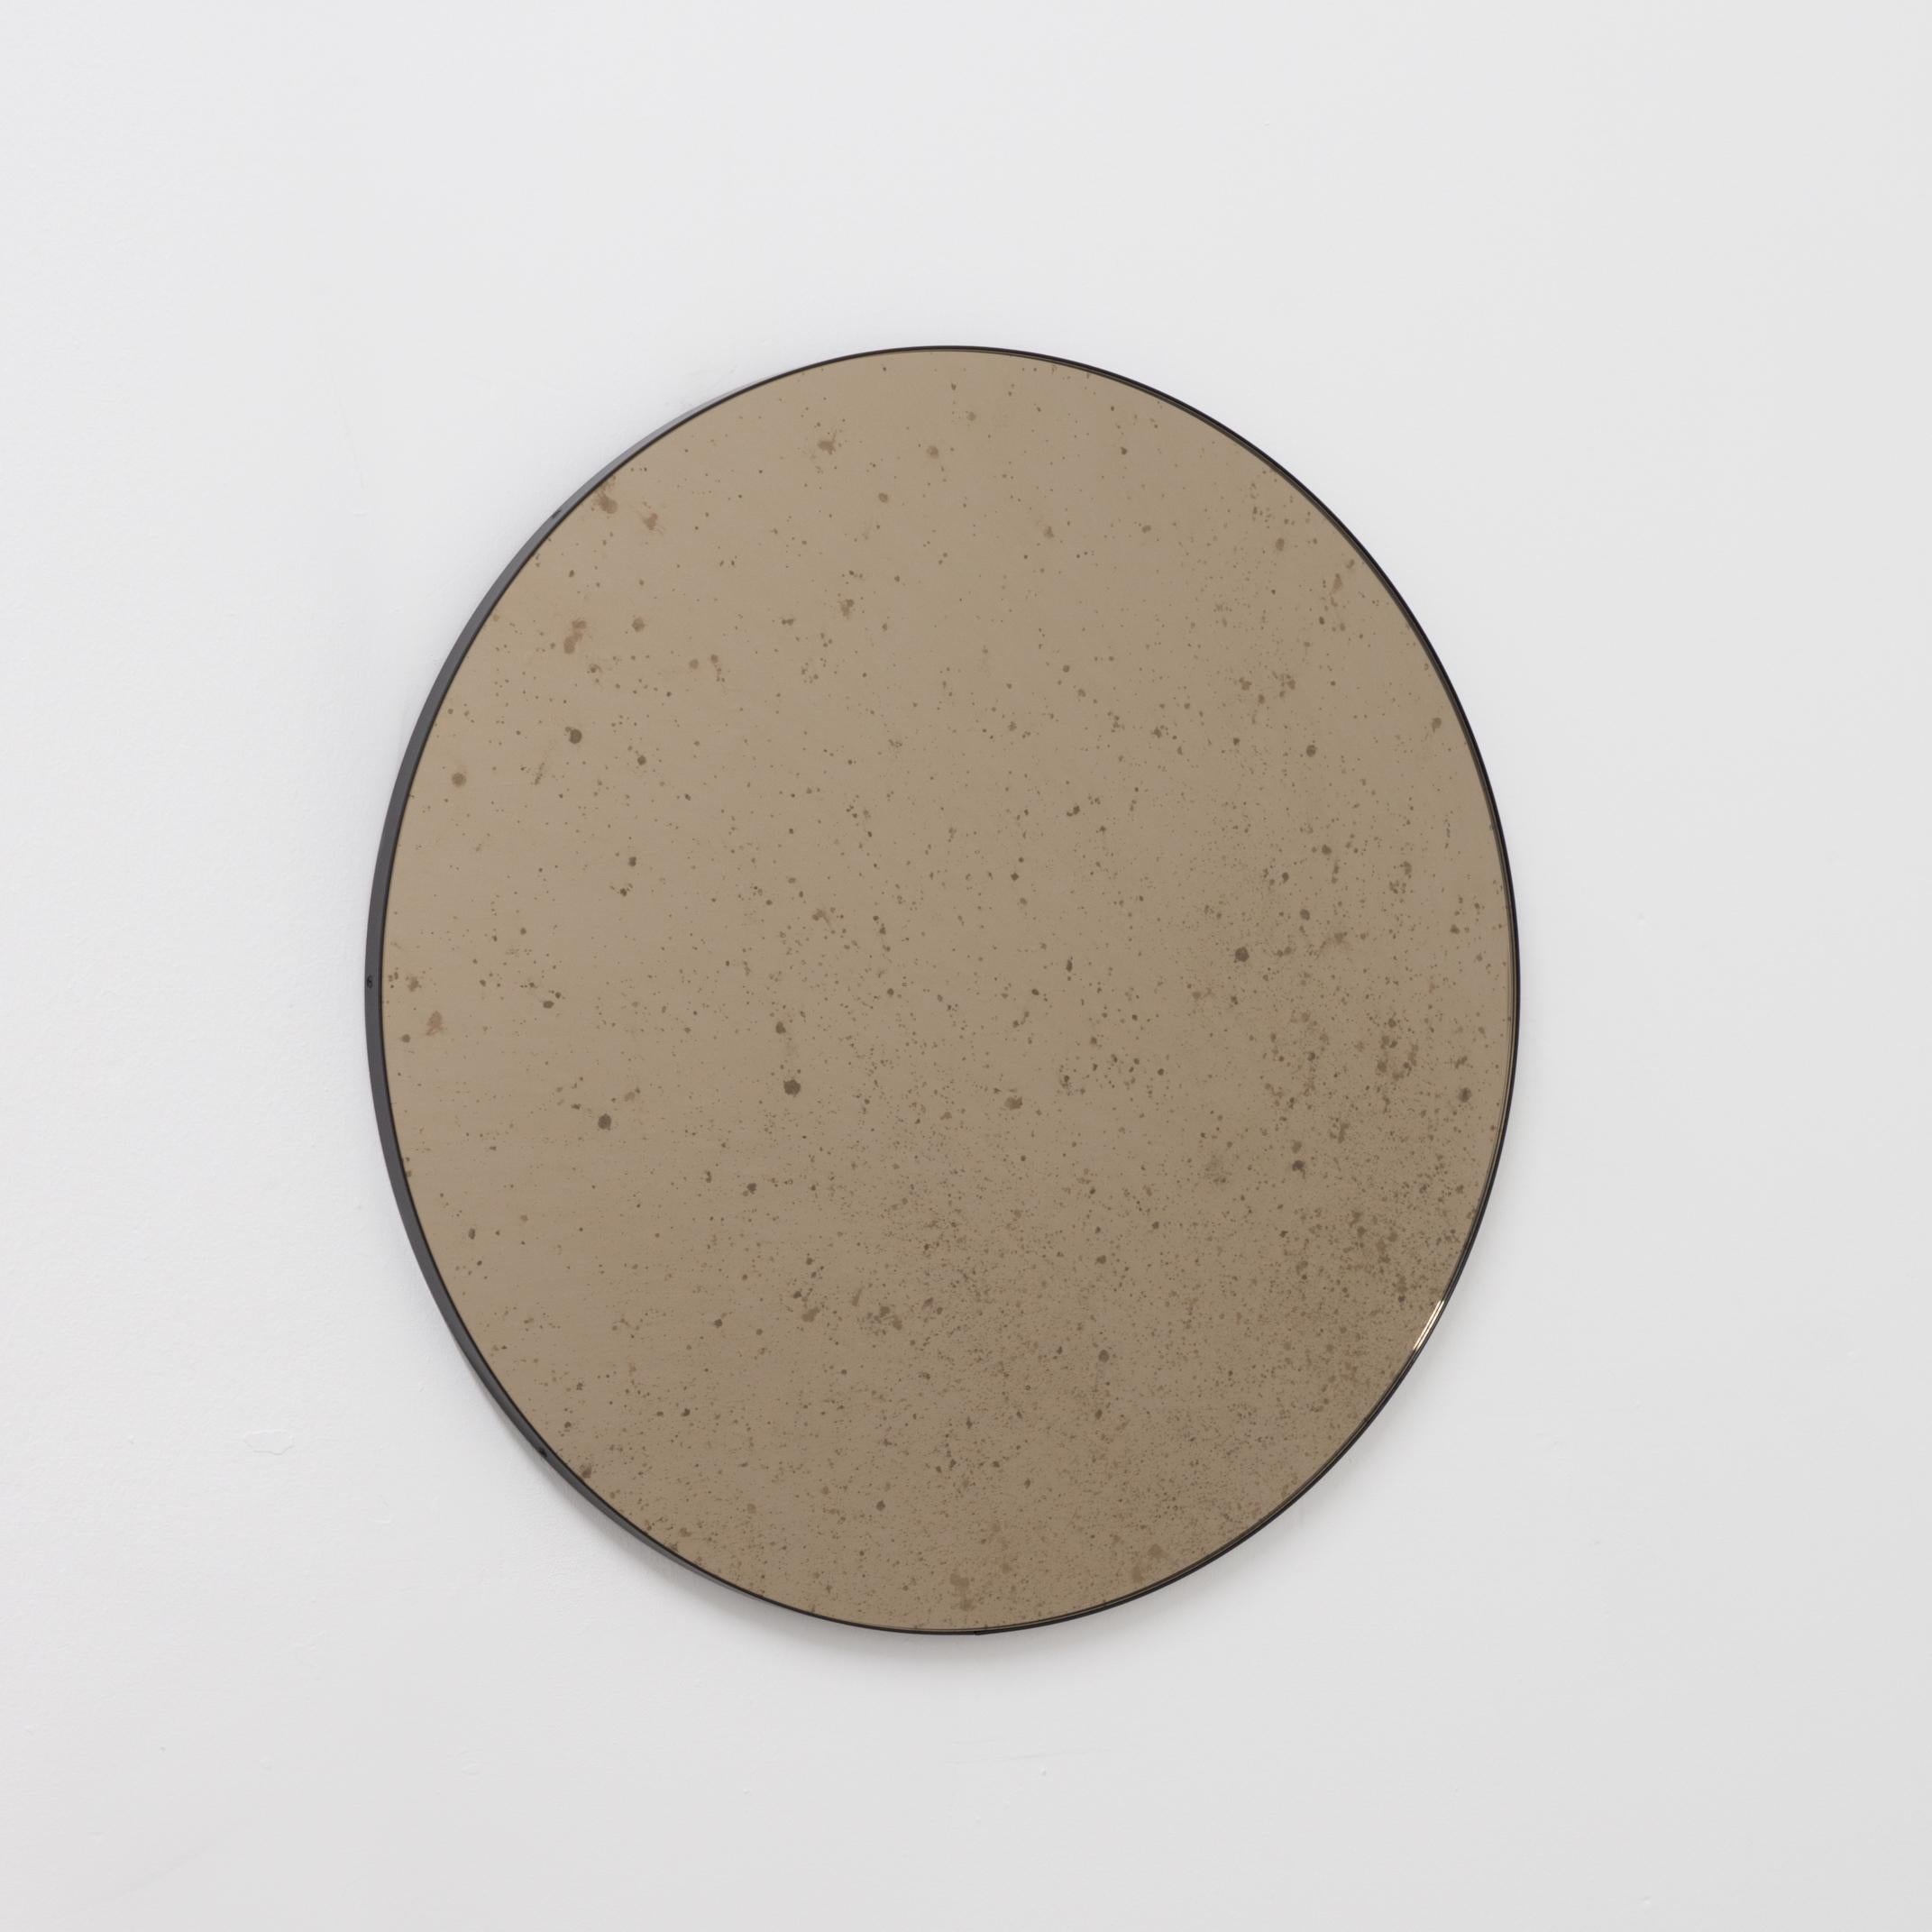 Delightful bronze tinted antiqued round mirror with an elegant black frame. Designed and handcrafted in London, UK.

Medium, large and extra-large mirrors (60, 80 and 100cm) are fitted with an ingenious French cleat (split batten) system so they may